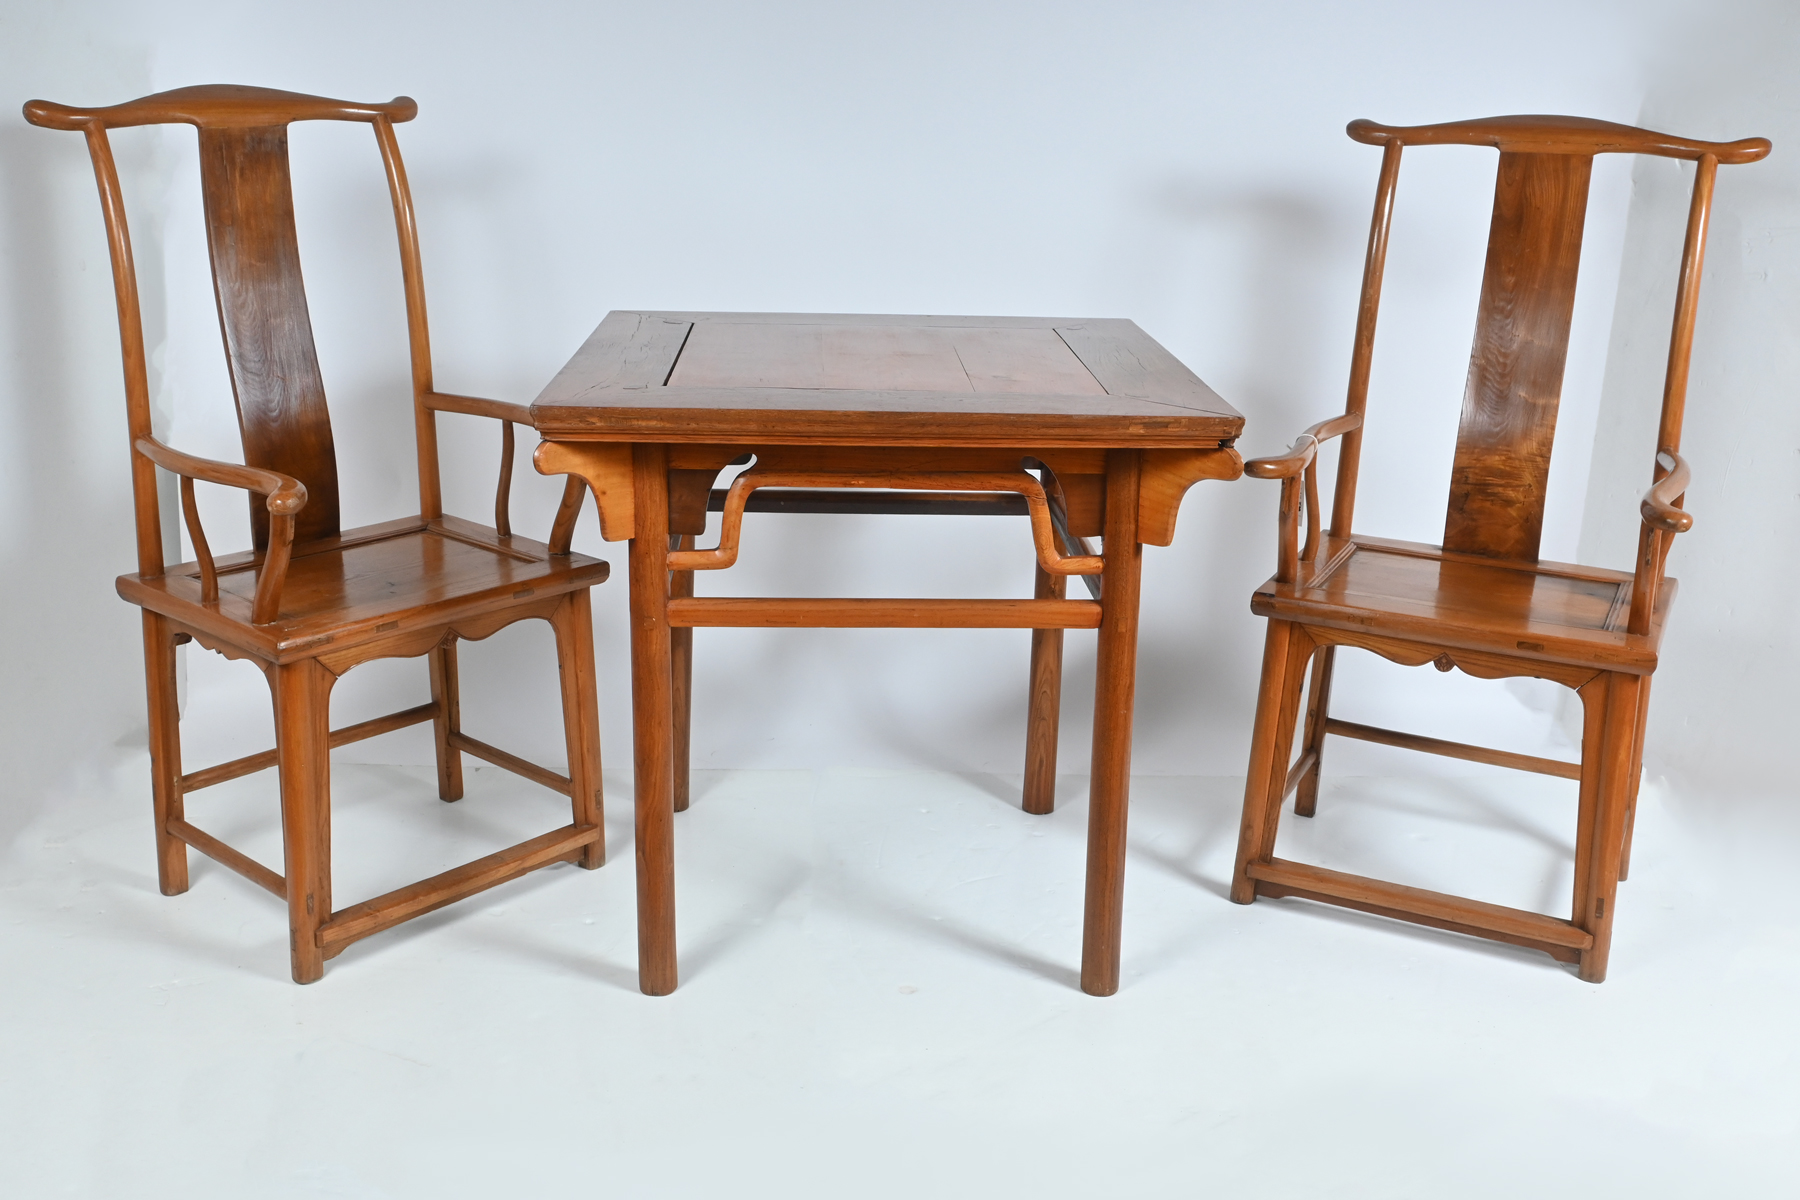 3 PC. 19TH-CENTURY CHINESE TABLE